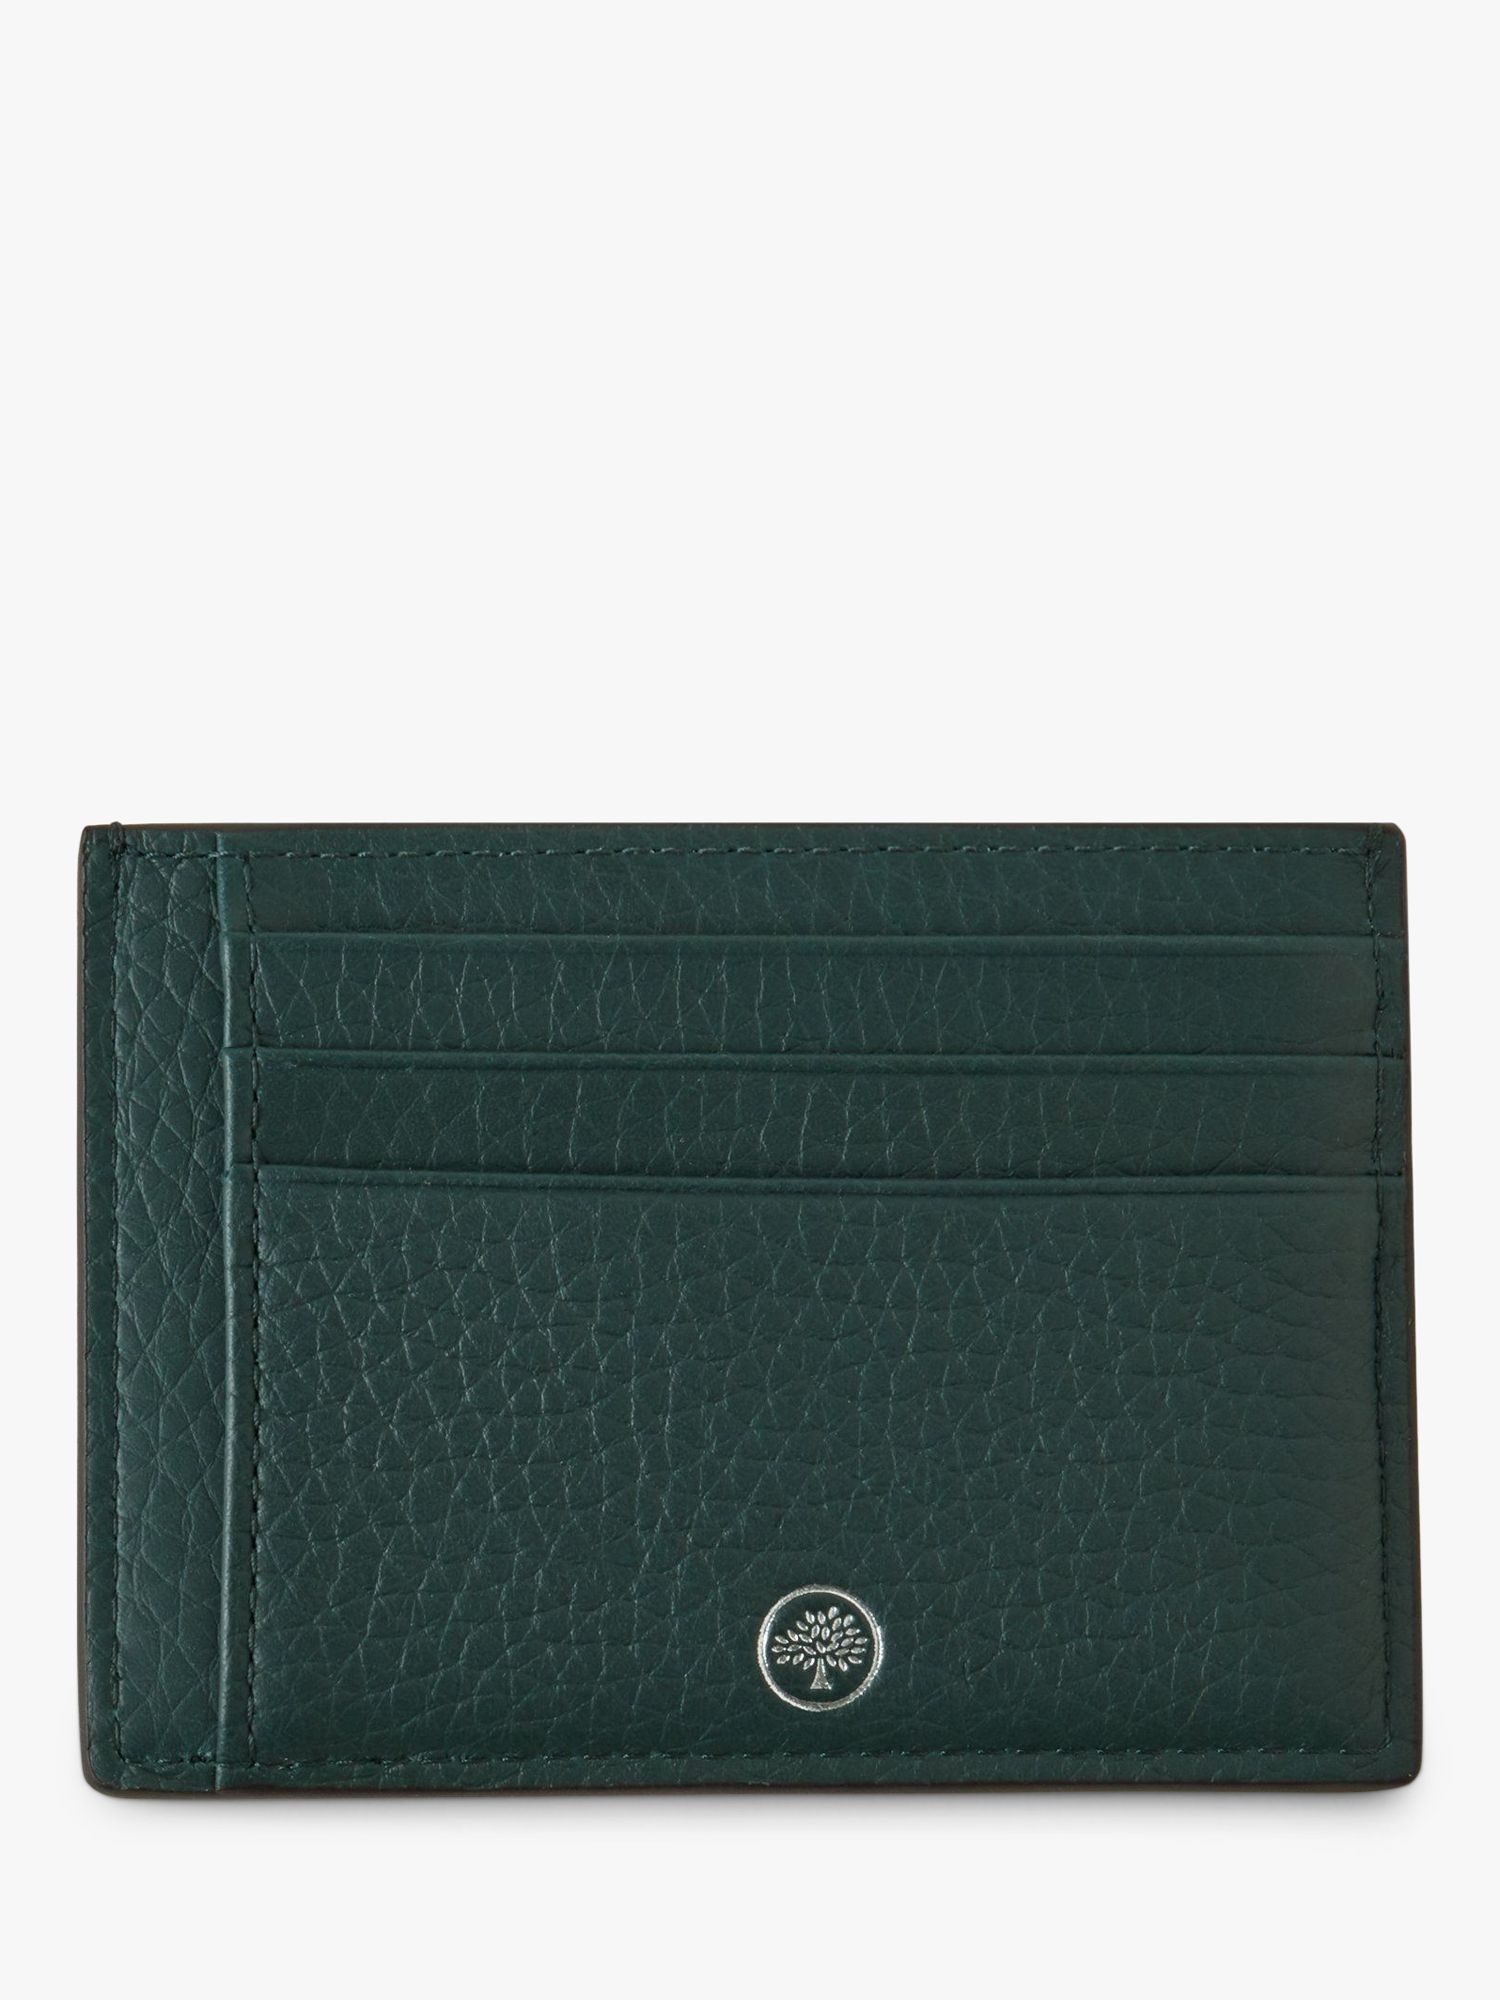 Mulberry Heavy Grain Leather Card Holder, Mulberry Green